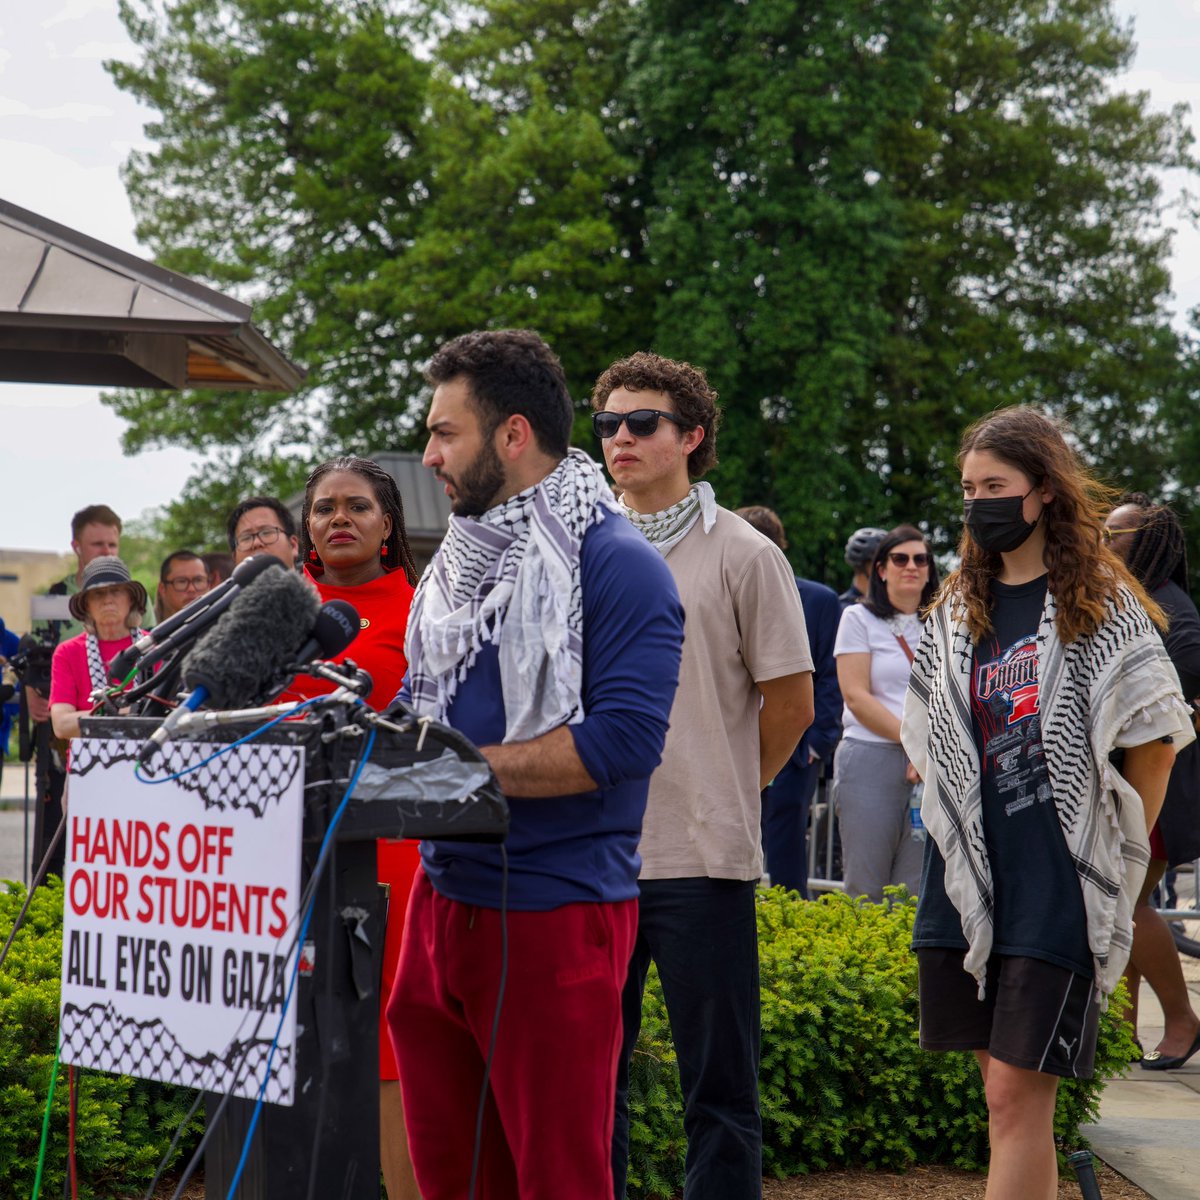 Yesterday, @RepRashida & I were proud to stand alongside courageous student organizers from George Washington University. From GWU to WashU, our students are being brutalized for protesting against the genocide of Palestinians in Gaza.